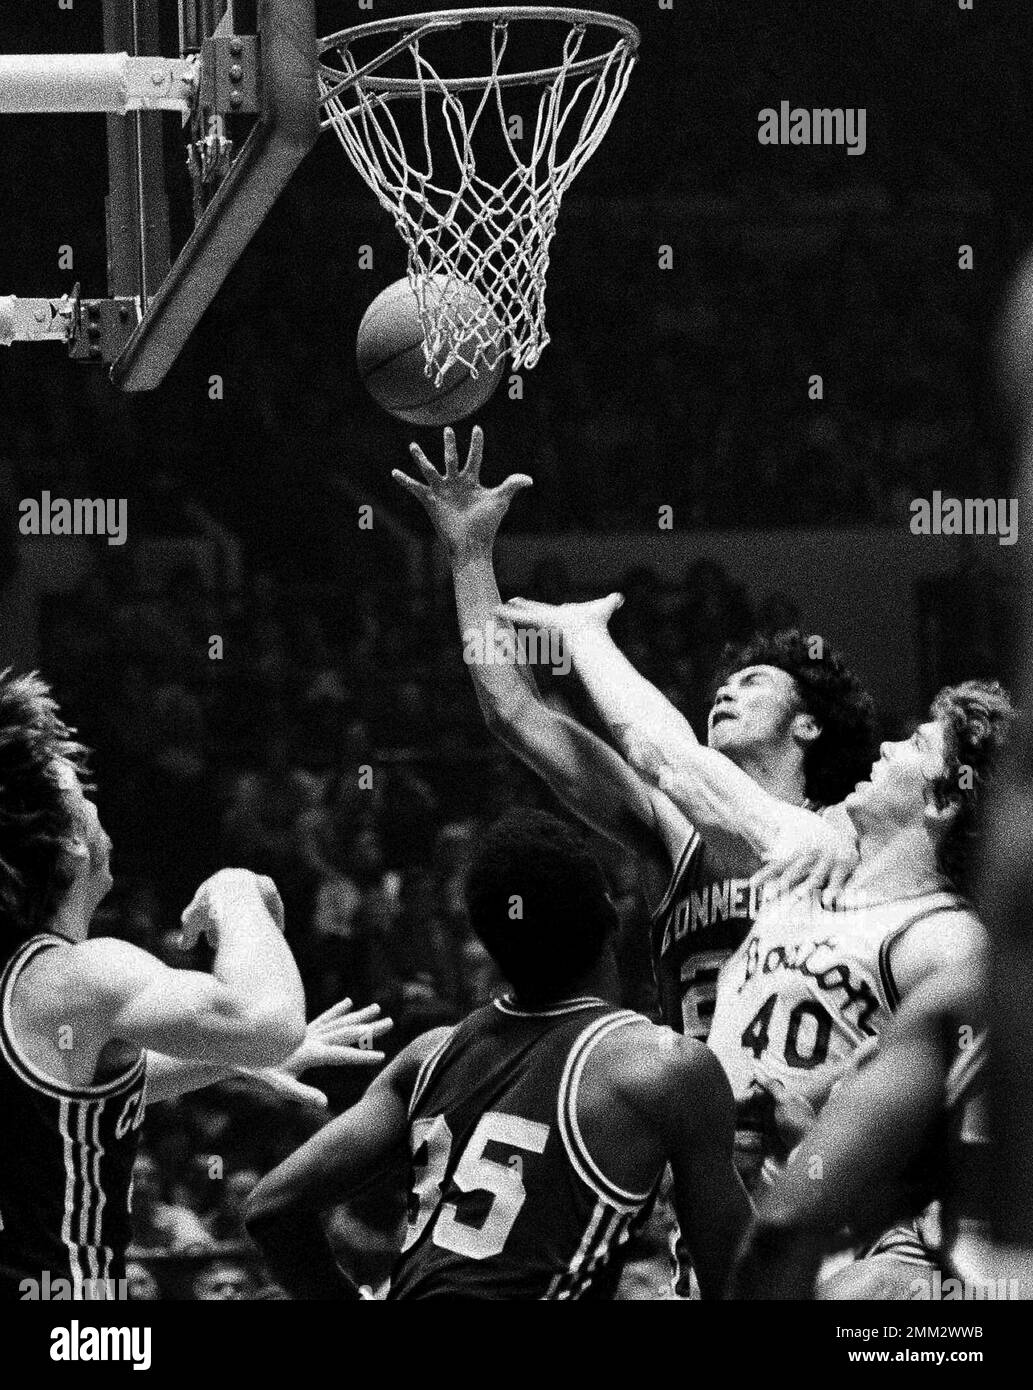 https://c8.alamy.com/comp/2MM2WWB/file-in-this-march-22-1974-file-photo-connecticuts-tony-hanson-top-right-and-boston-colleges-mark-raterink-40-contend-for-a-rebound-during-an-national-invitation-tournament-college-basketball-game-at-madison-square-garden-in-new-york-hanson-died-sunday-nov-25-2018-at-his-home-in-windham-conn-he-was-63-ap-photo-file-2MM2WWB.jpg